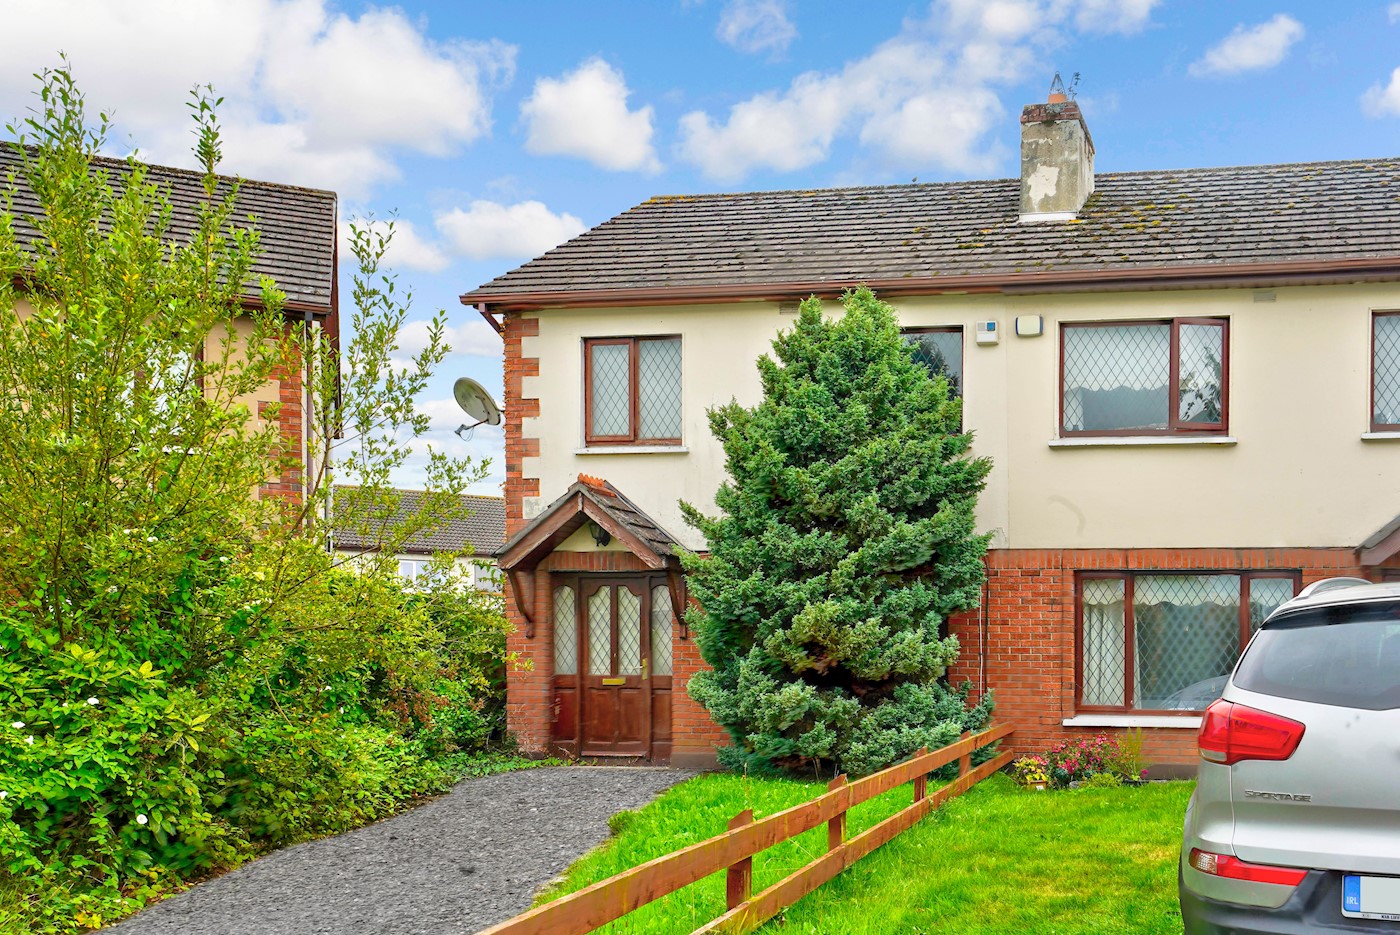 41 Hillview Heights, Clane, Co. Kildare, W91 CX56 1/14